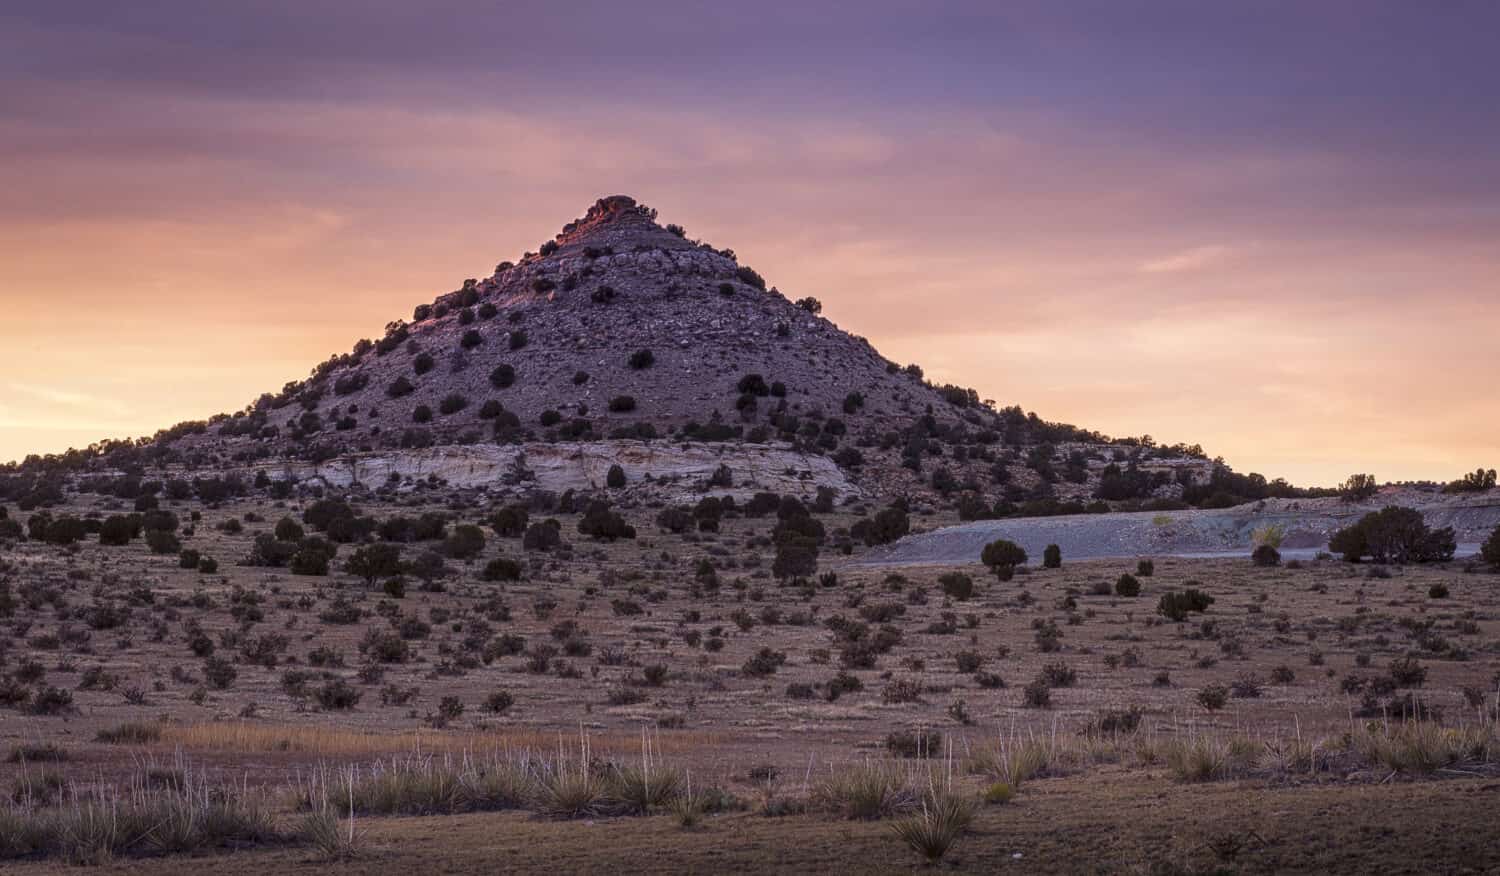 The sun sets on this pointy mountain/hill near Black Mesa in the Oklahoma panhandle.